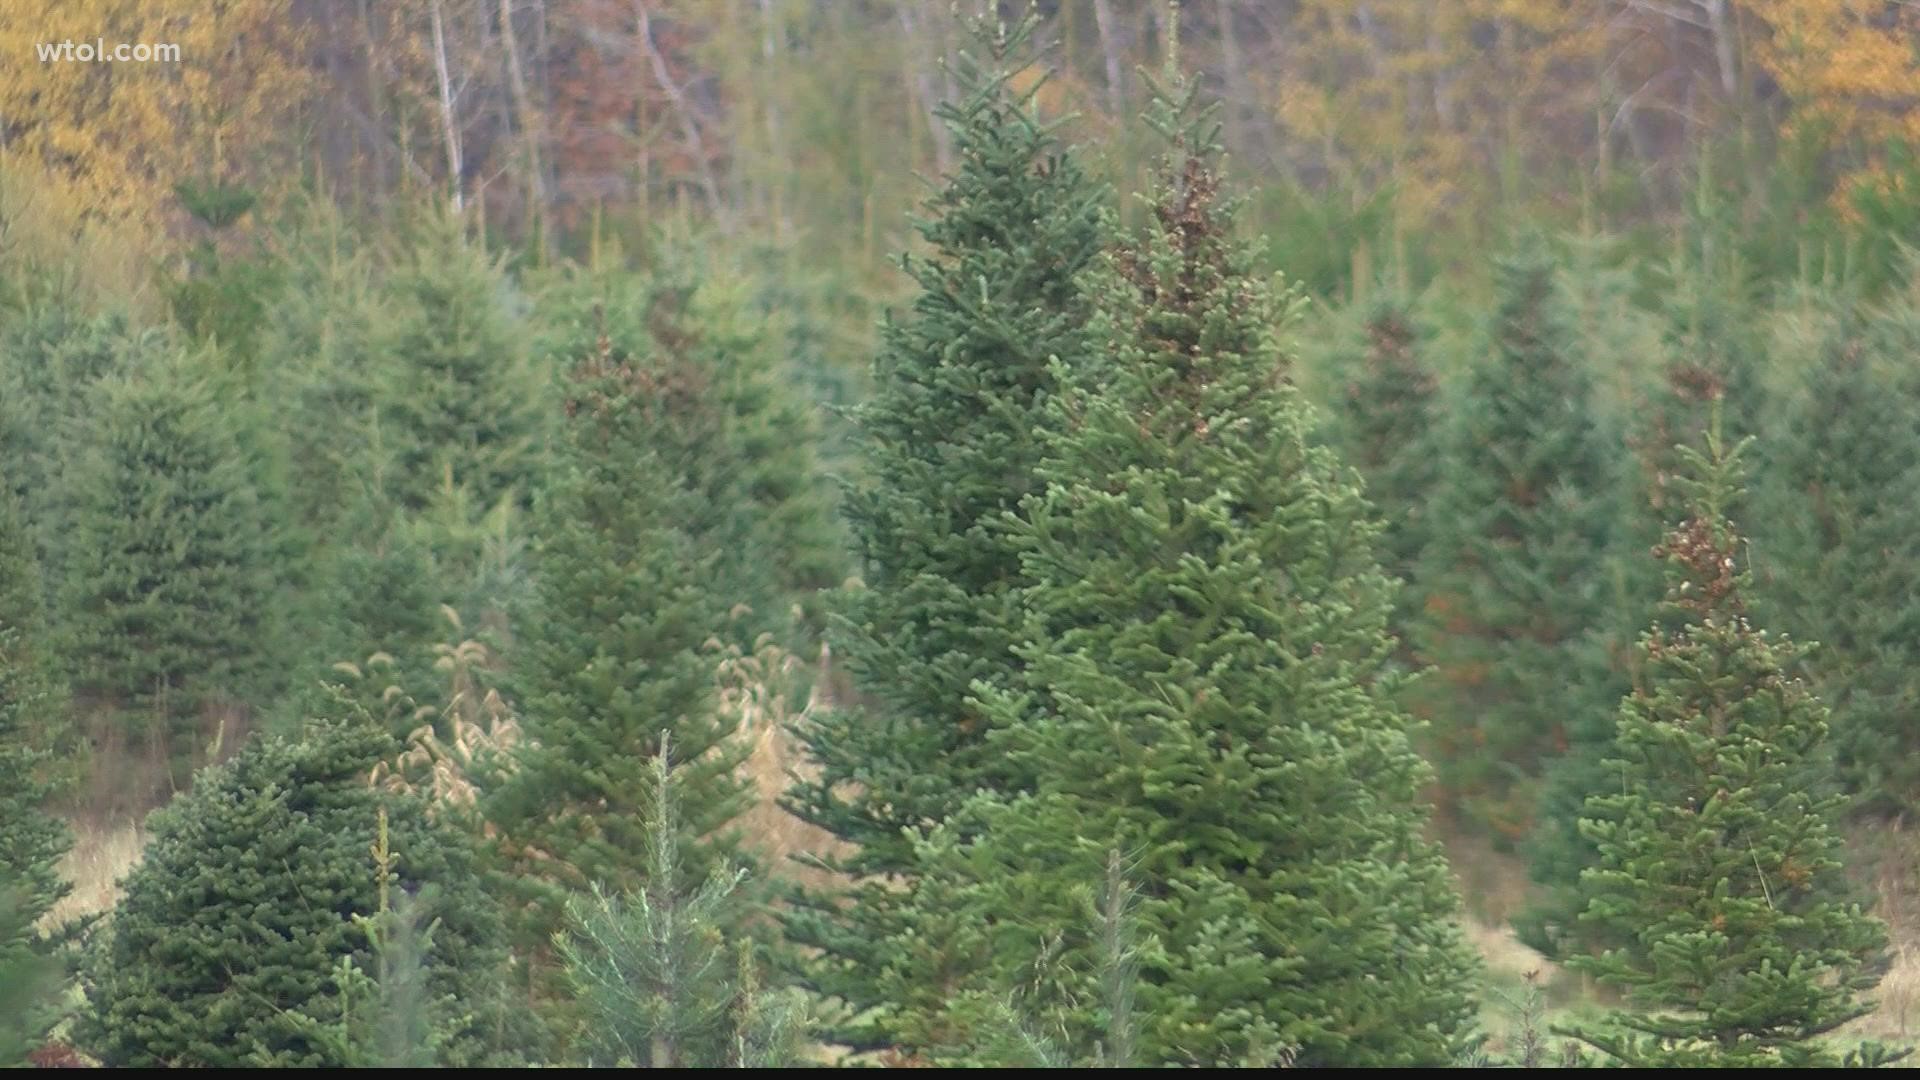 The Trees for Troops program has provided more than 262,000 Christmas trees to military families since 2005. This year, trees from Whitehouse will go to Fort Sill.